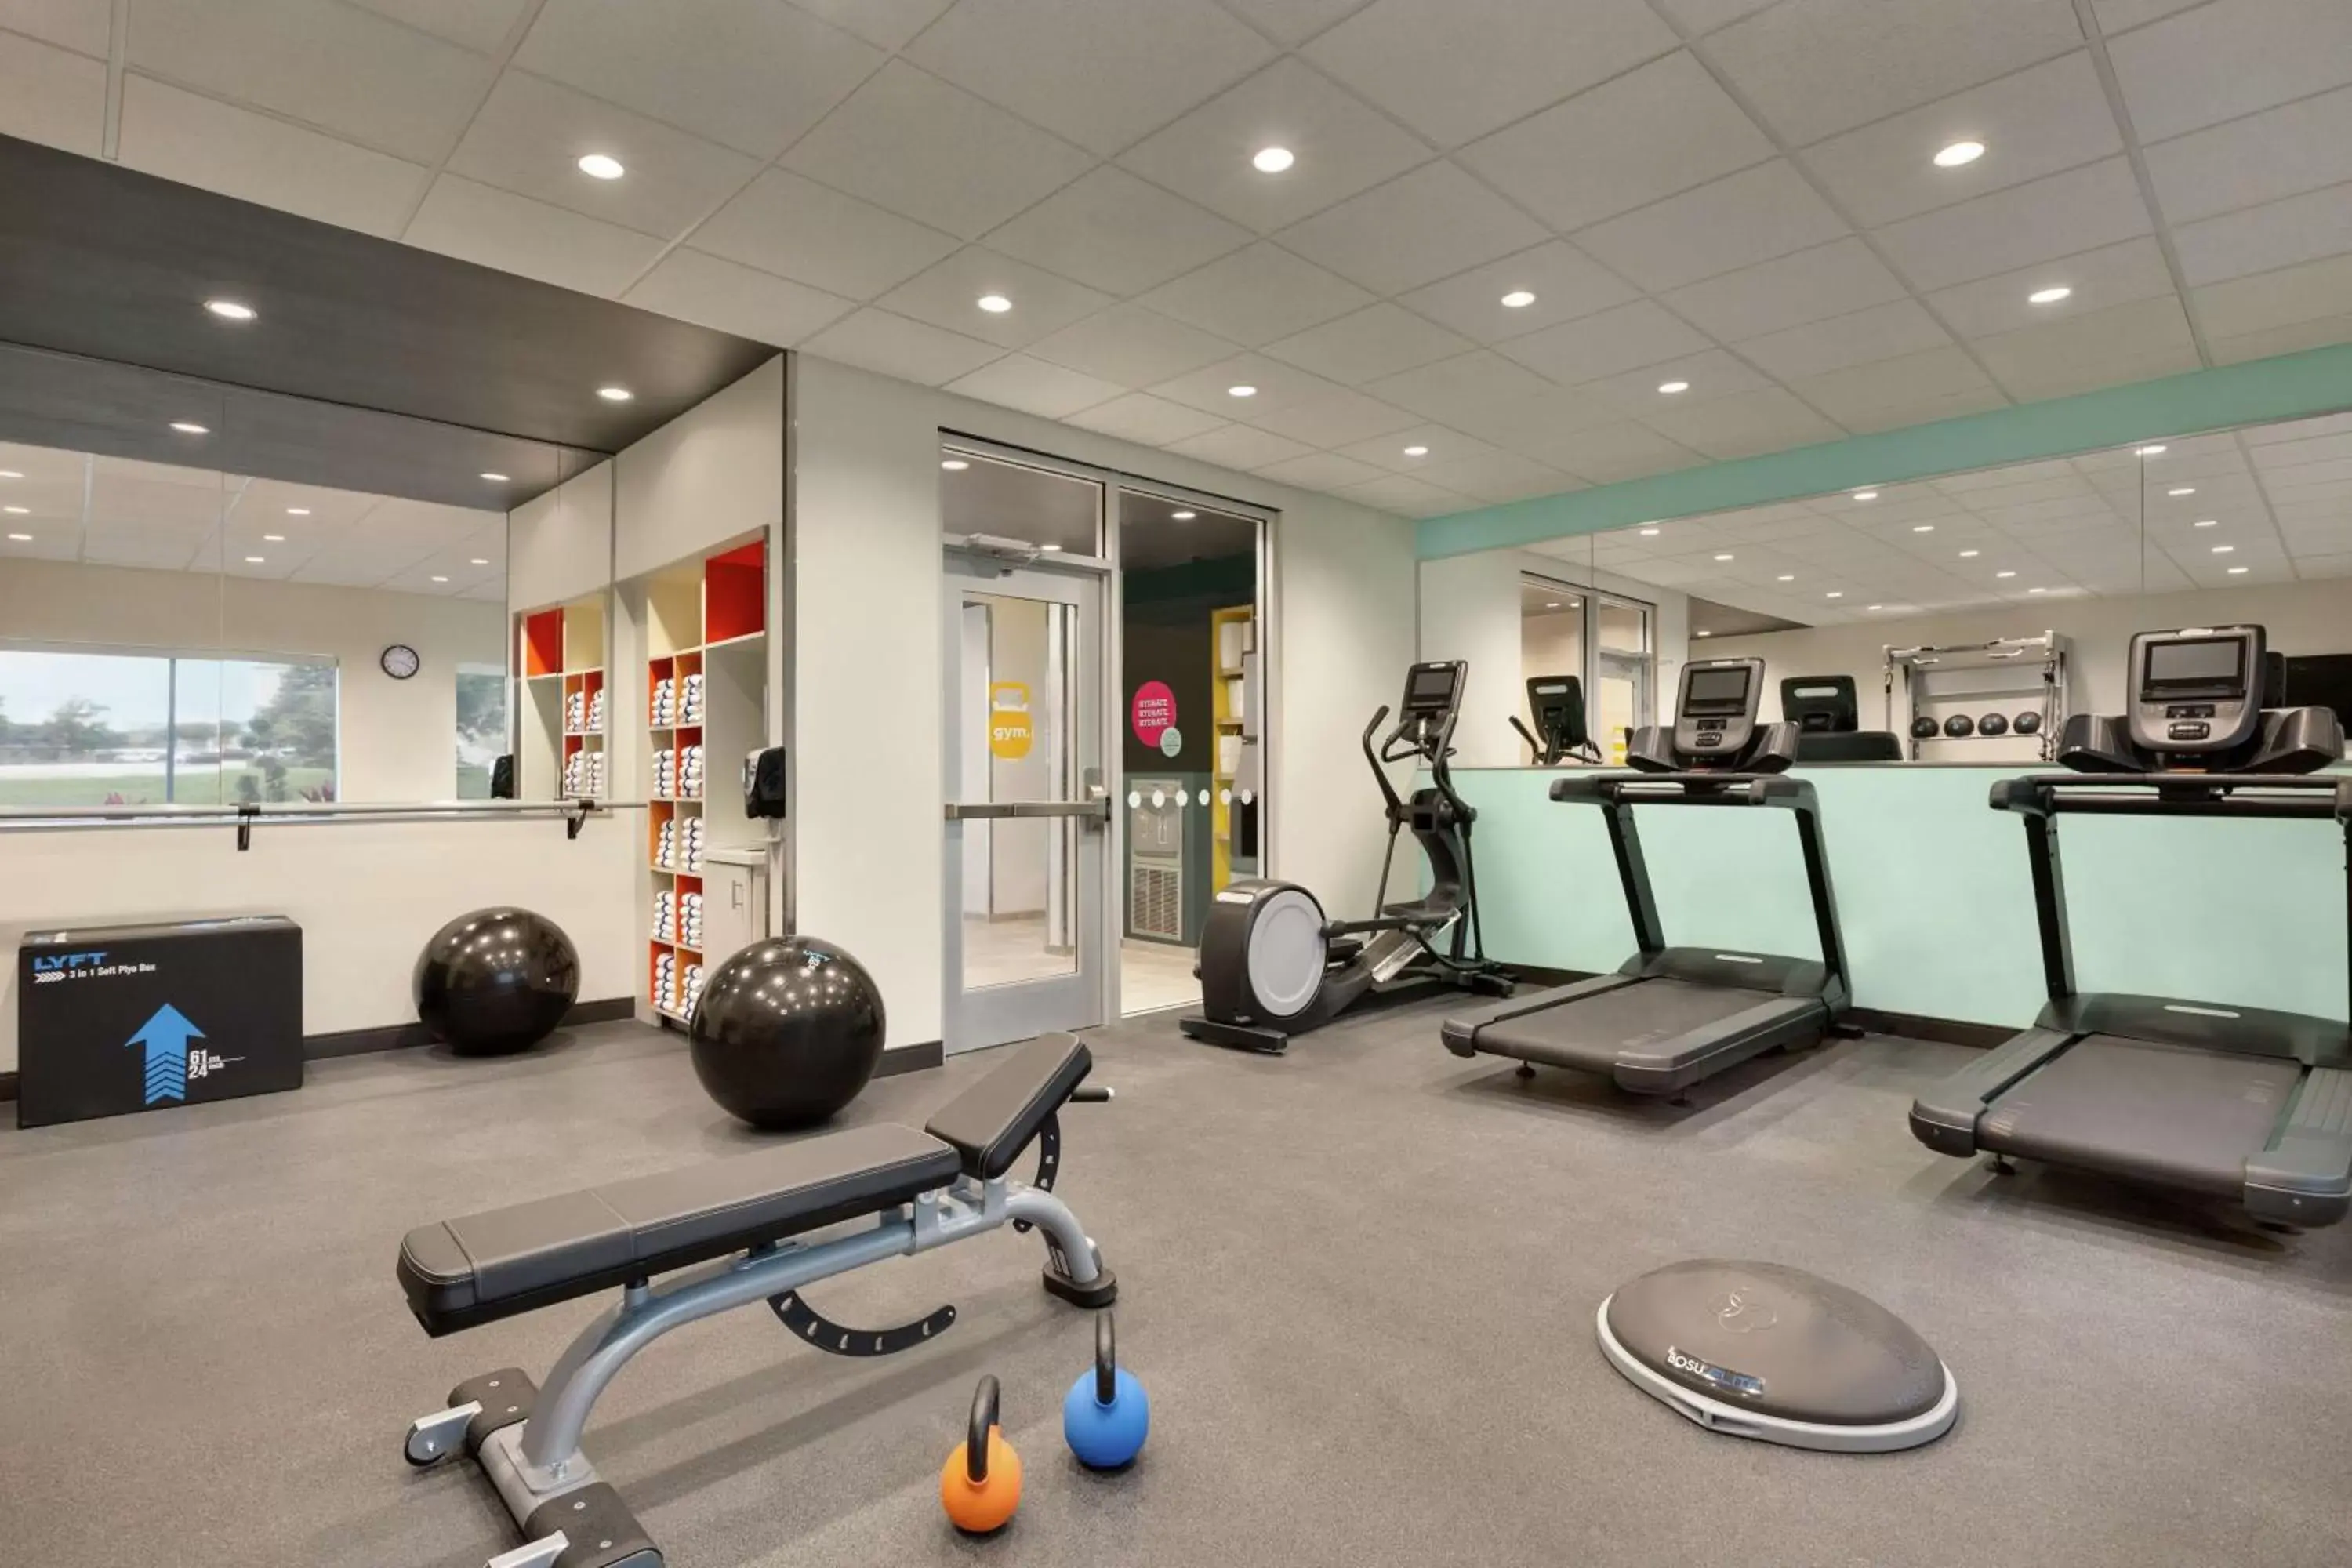 Fitness centre/facilities, Fitness Center/Facilities in Tru by Hilton Webster Houston NASA